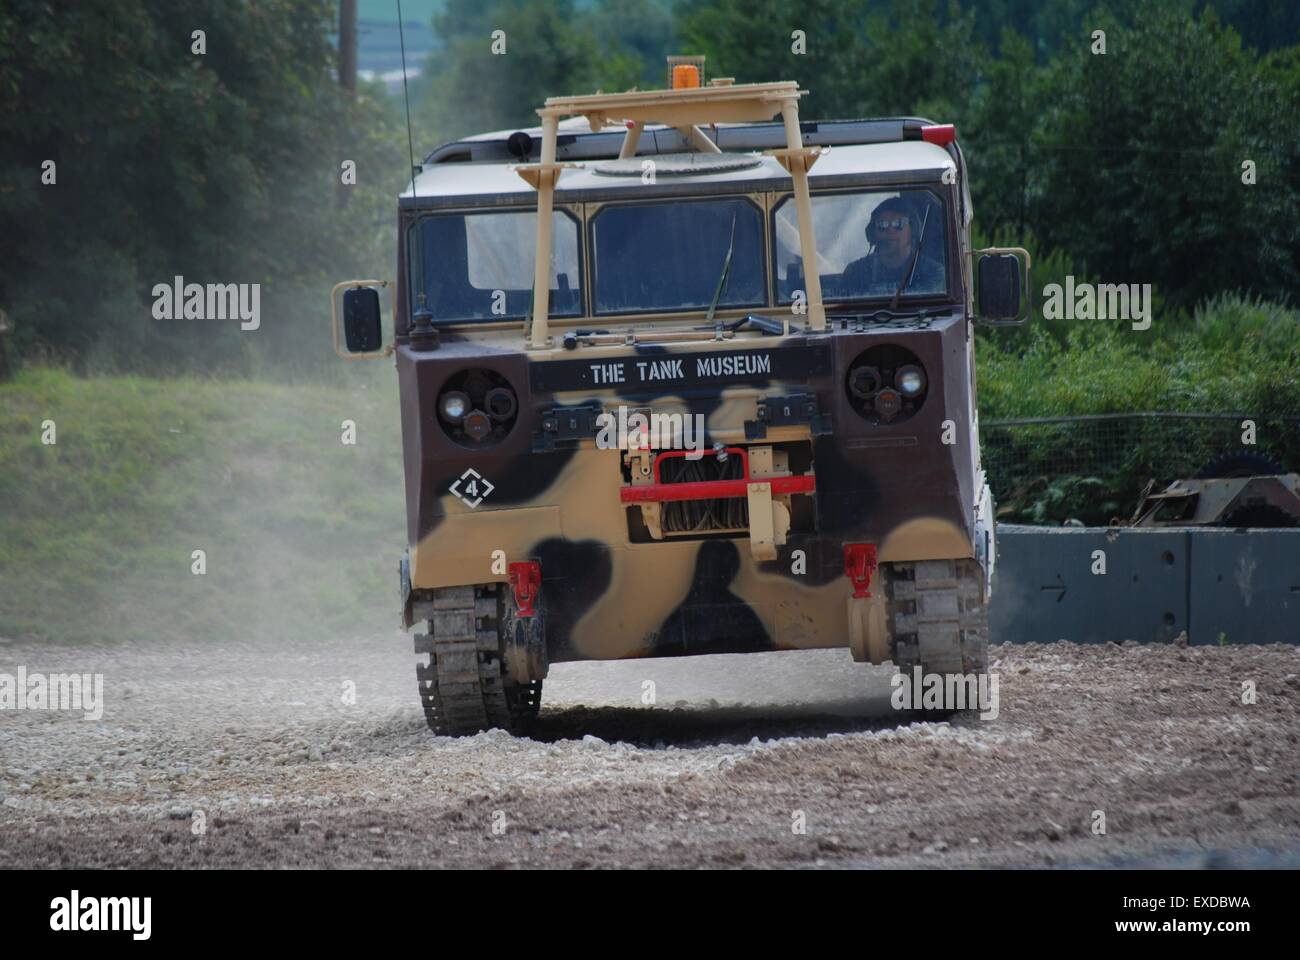 Bovington Tank Museum, Dorset, UK. Modern army personnel transporter on active display at the First World War centenary event, 2014 Stock Photo